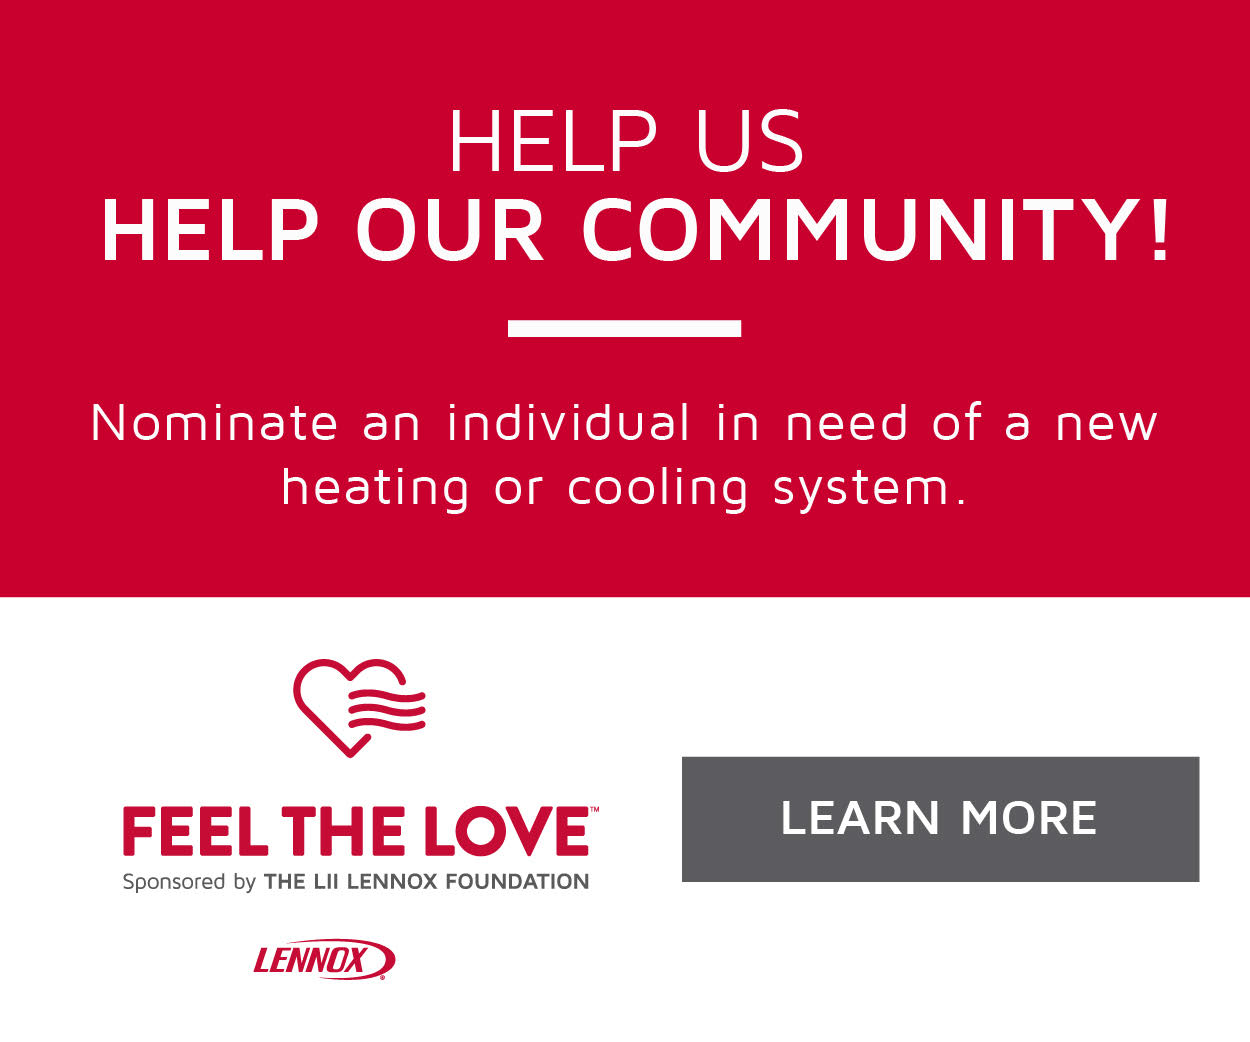 Nominate an individual in need of a new heating or cooling system.